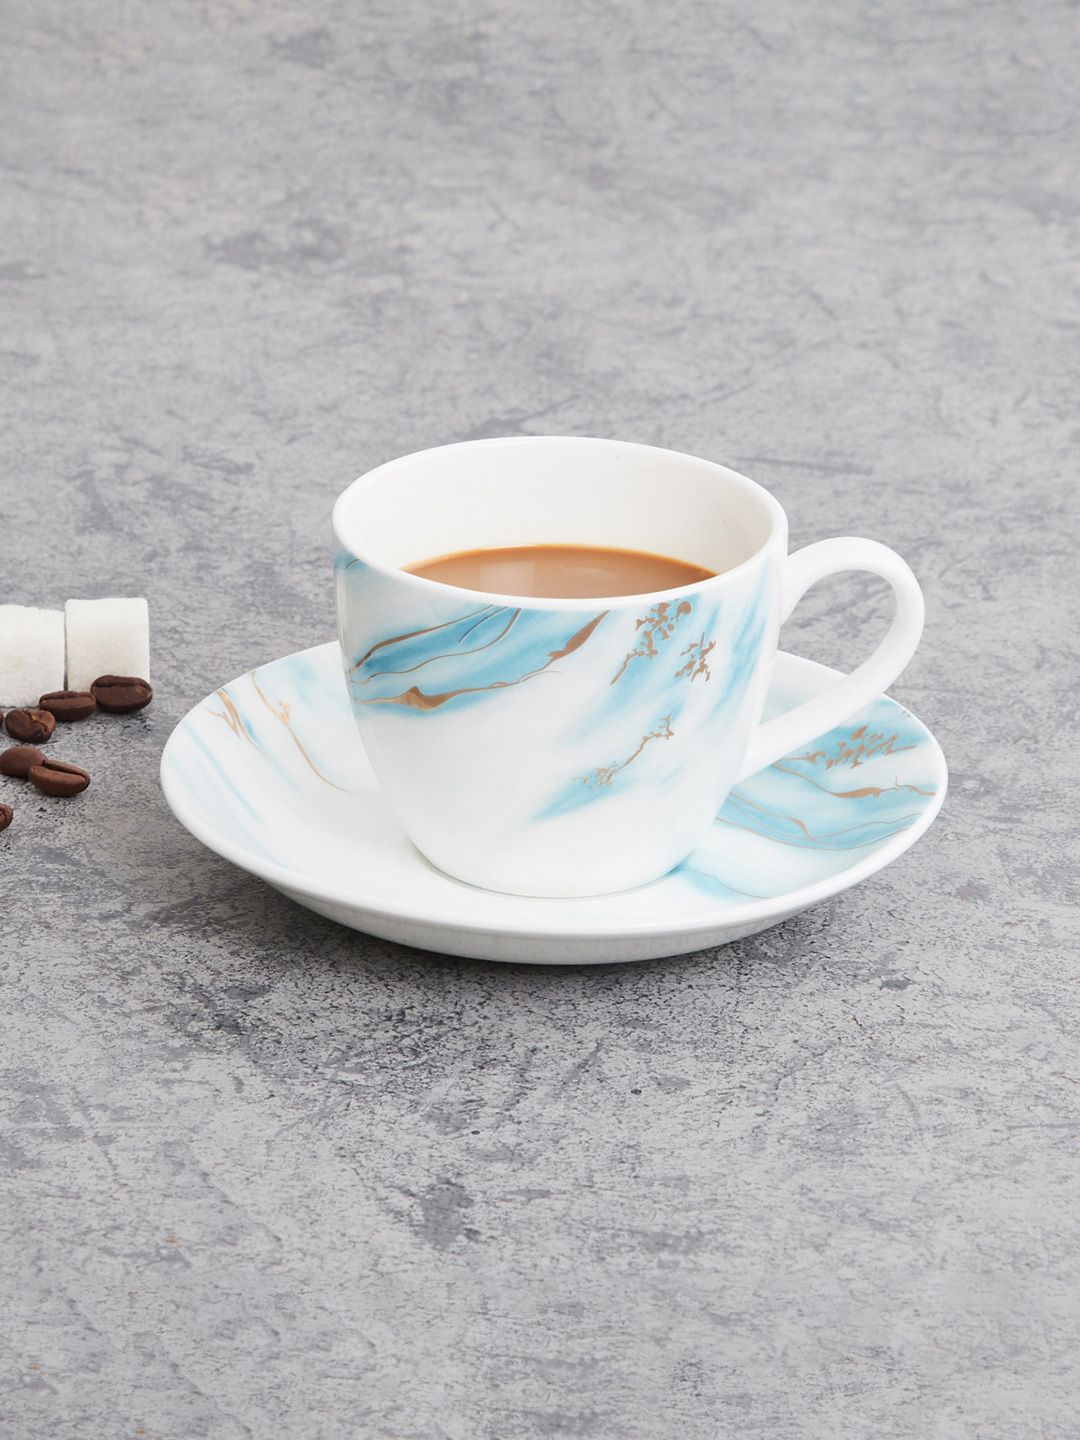 Home Centre Teal & White Printed Bone China Glossy Cups and Saucers Set of Cups and Mugs Price in India